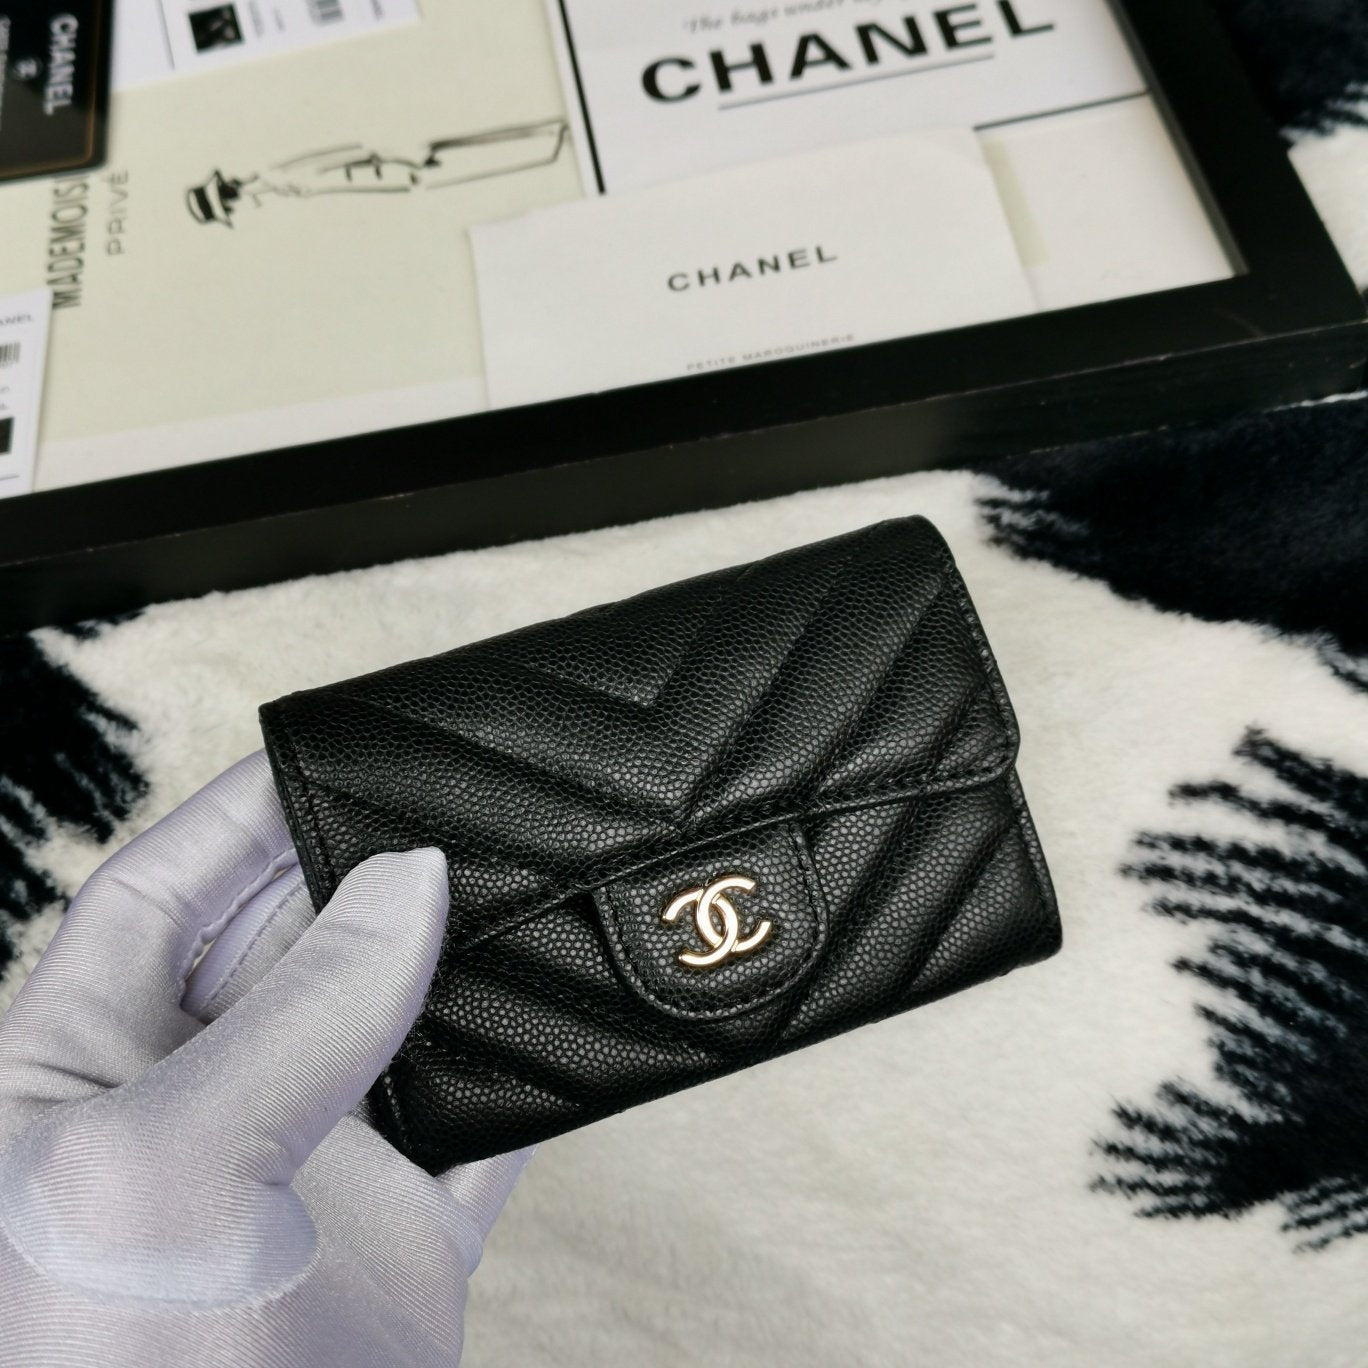 chanel petite maroquinerie wallet hot sale UP TO 52 OFF   wwwhumumssedubo